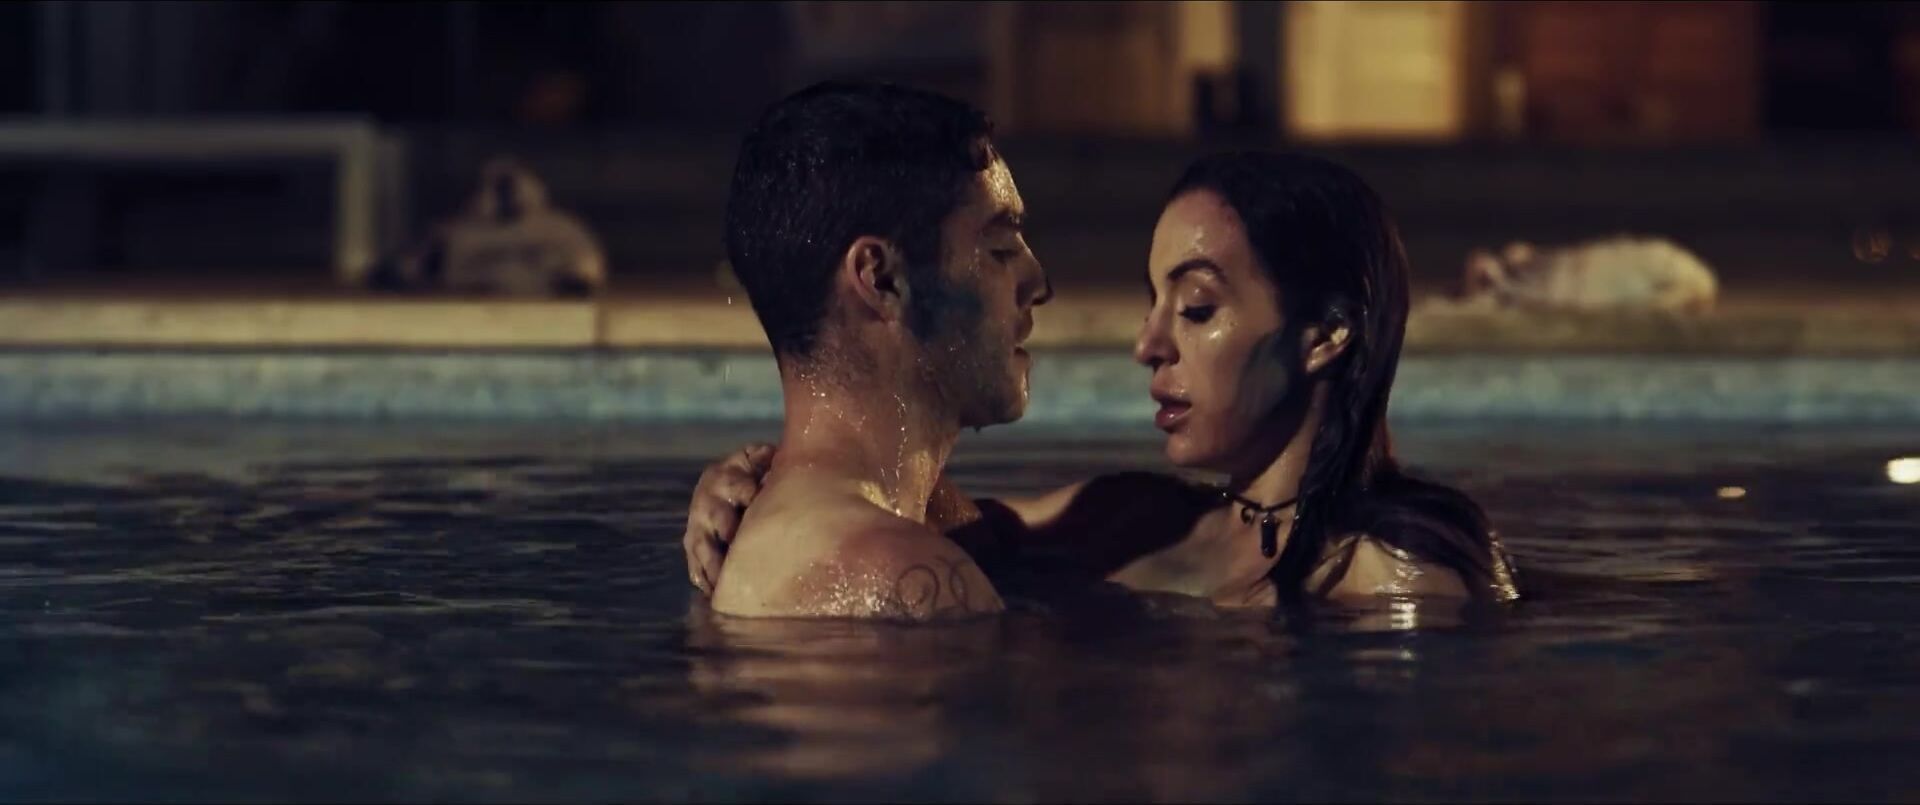 Videos Amadores Ryan Bown kisses Clare McCann in pool and gives sex in bed in feature movie Benefited Office